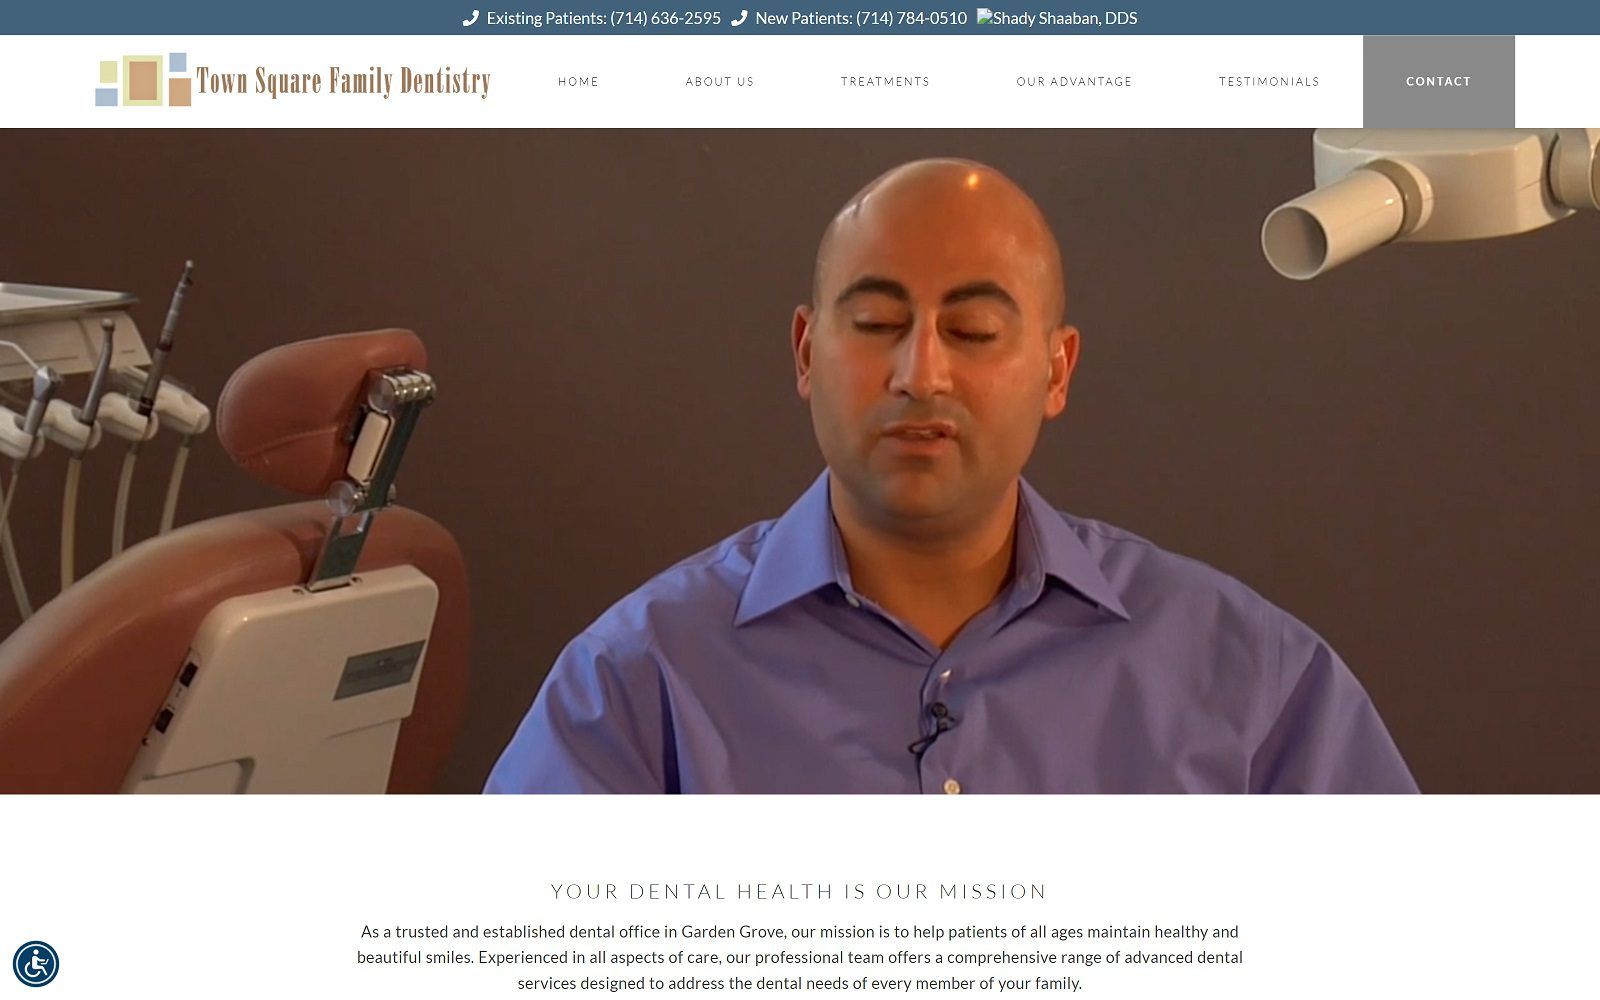 The screenshot of own square family dentistry: shady shaaban dds website